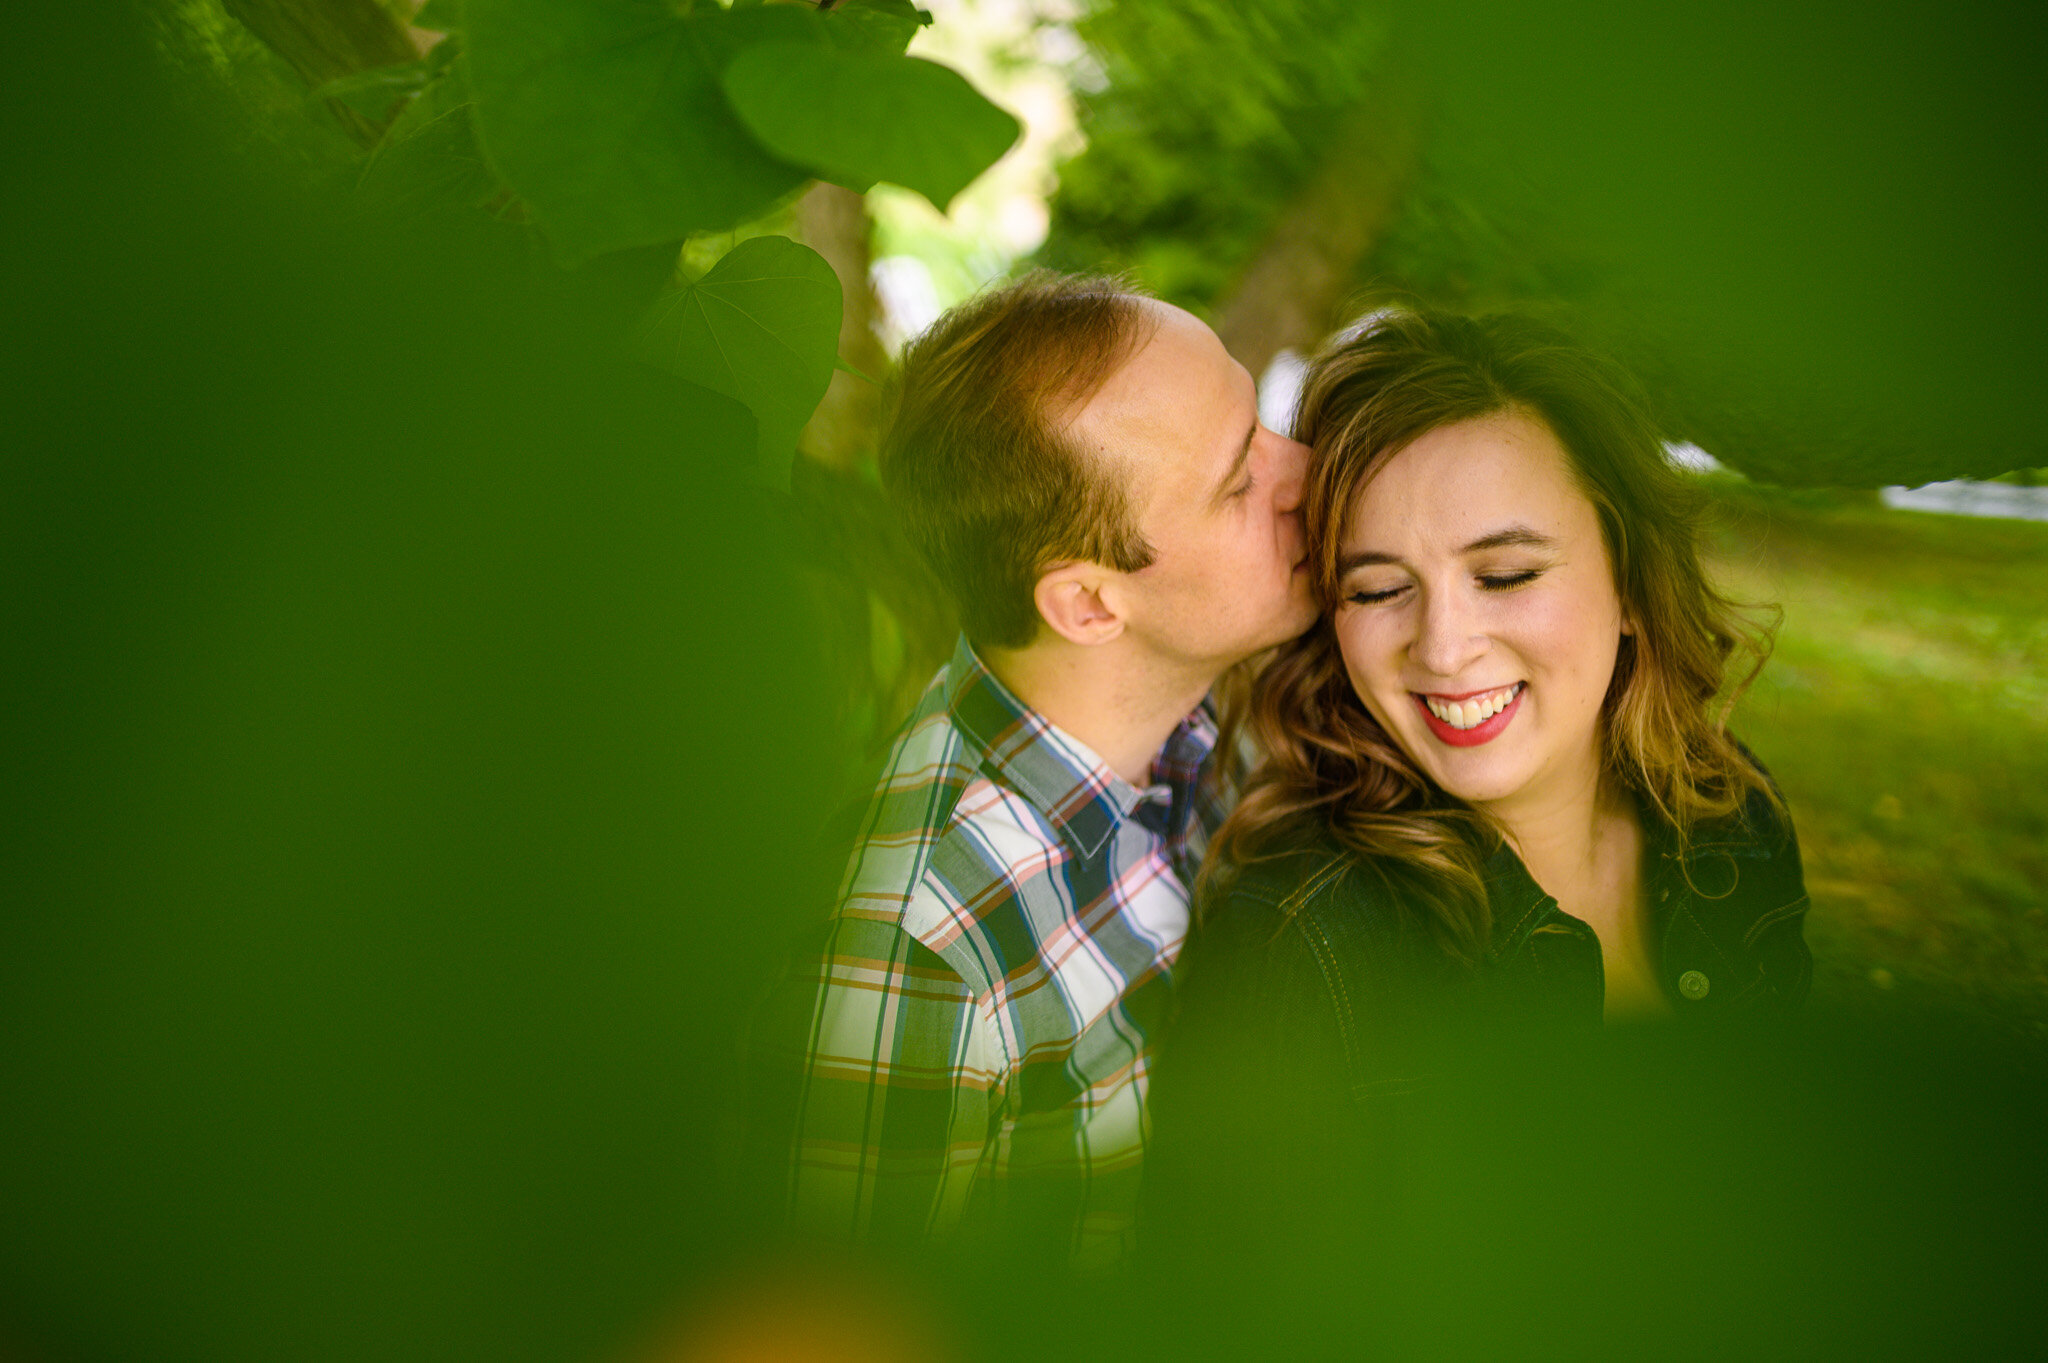 Outdoor engagement session looking through the leaves of a tree.